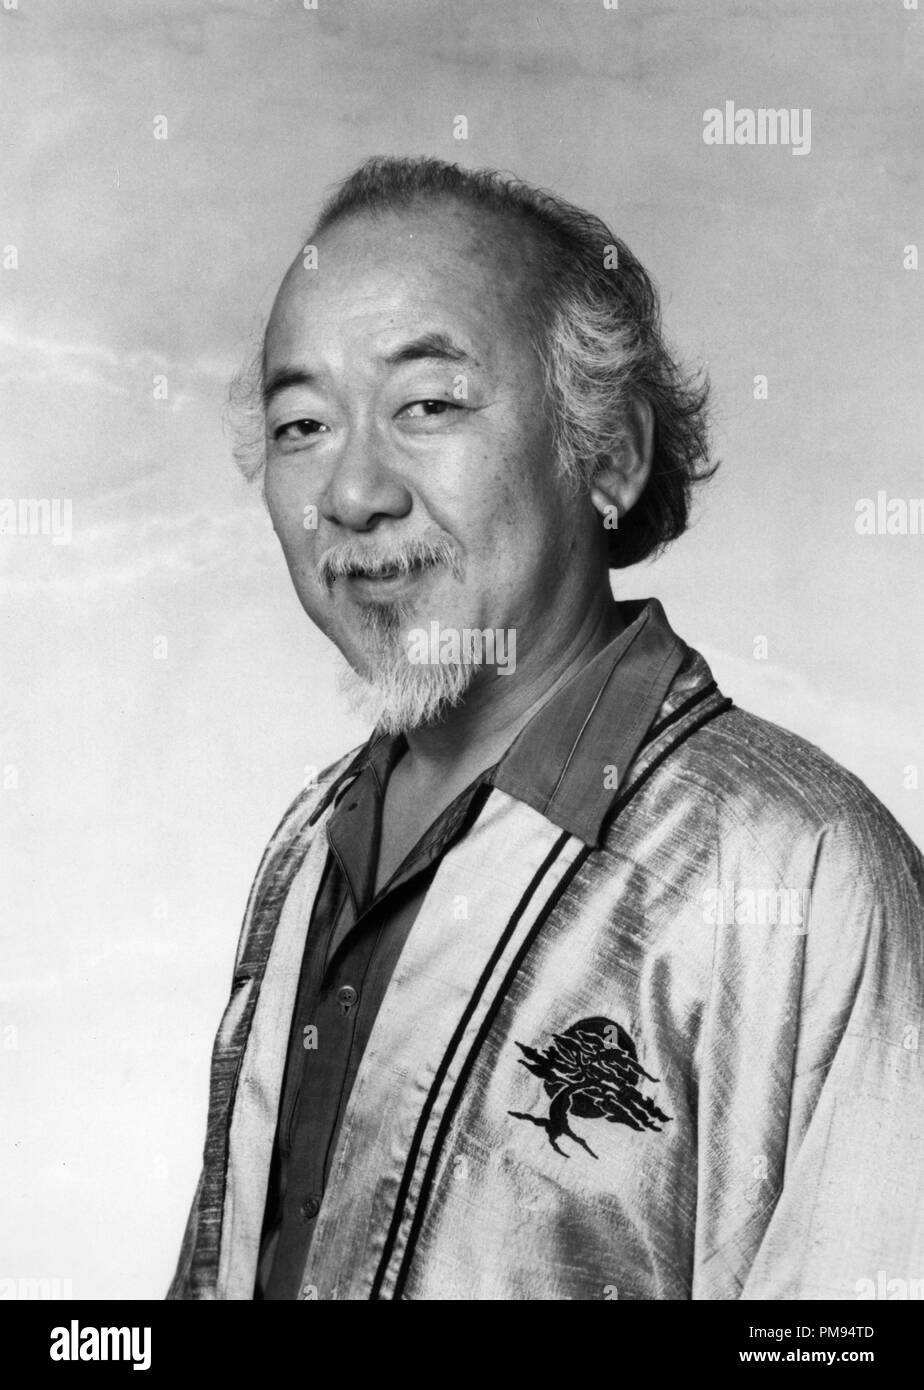 Studio Publicity Still from 'The Karate Kid, Part II' Pat Morita © 1986 Columbia Pictures  All Rights Reserved   File Reference # 31700047THA  For Editorial Use Only Stock Photo